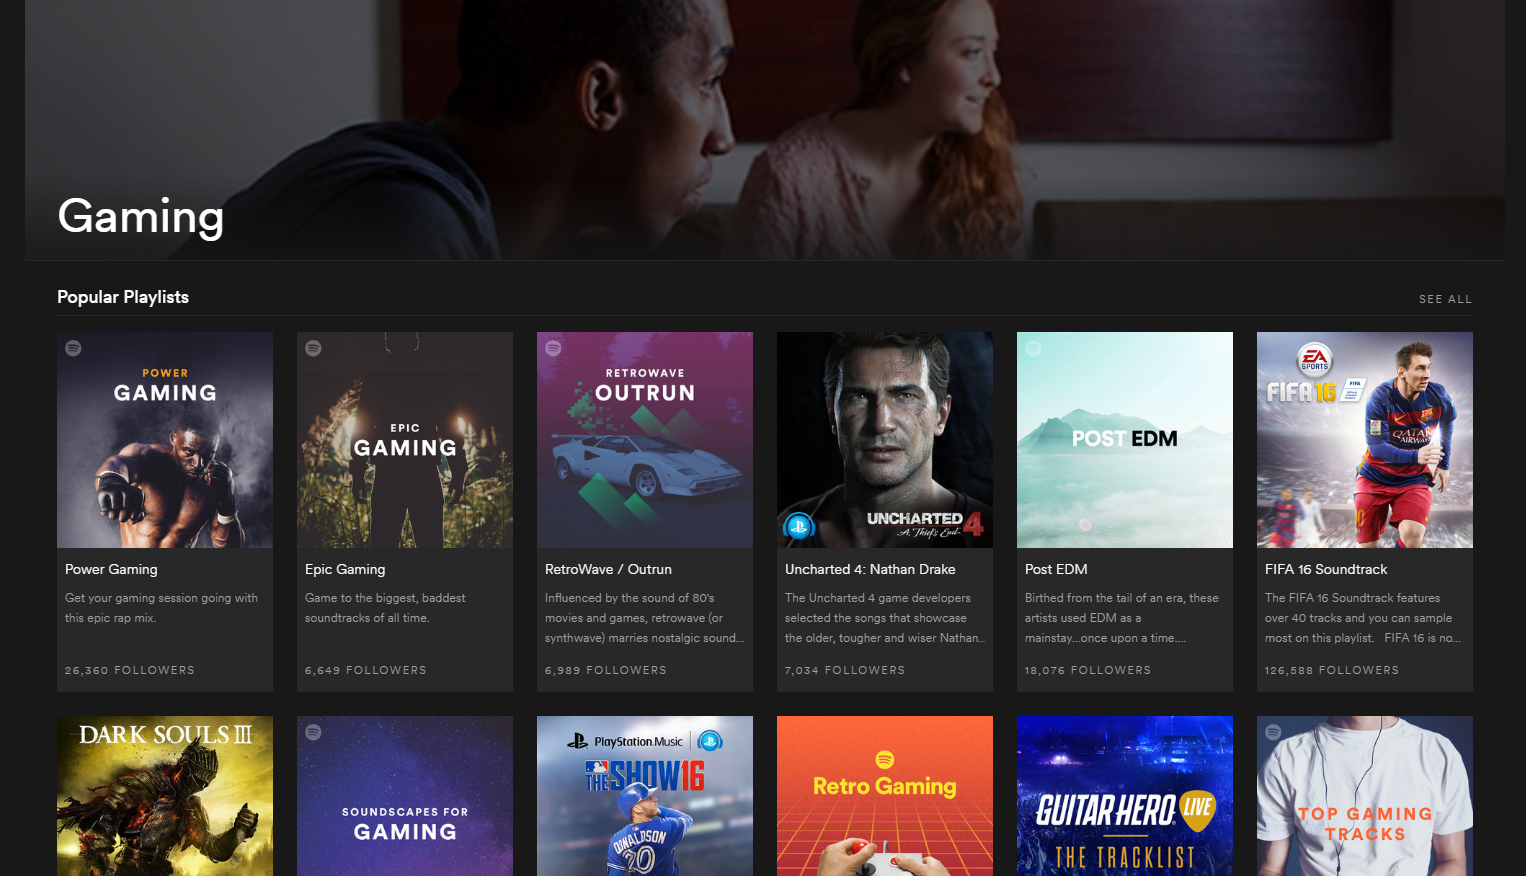 Spotify just launched a place for gaming on their music streaming service